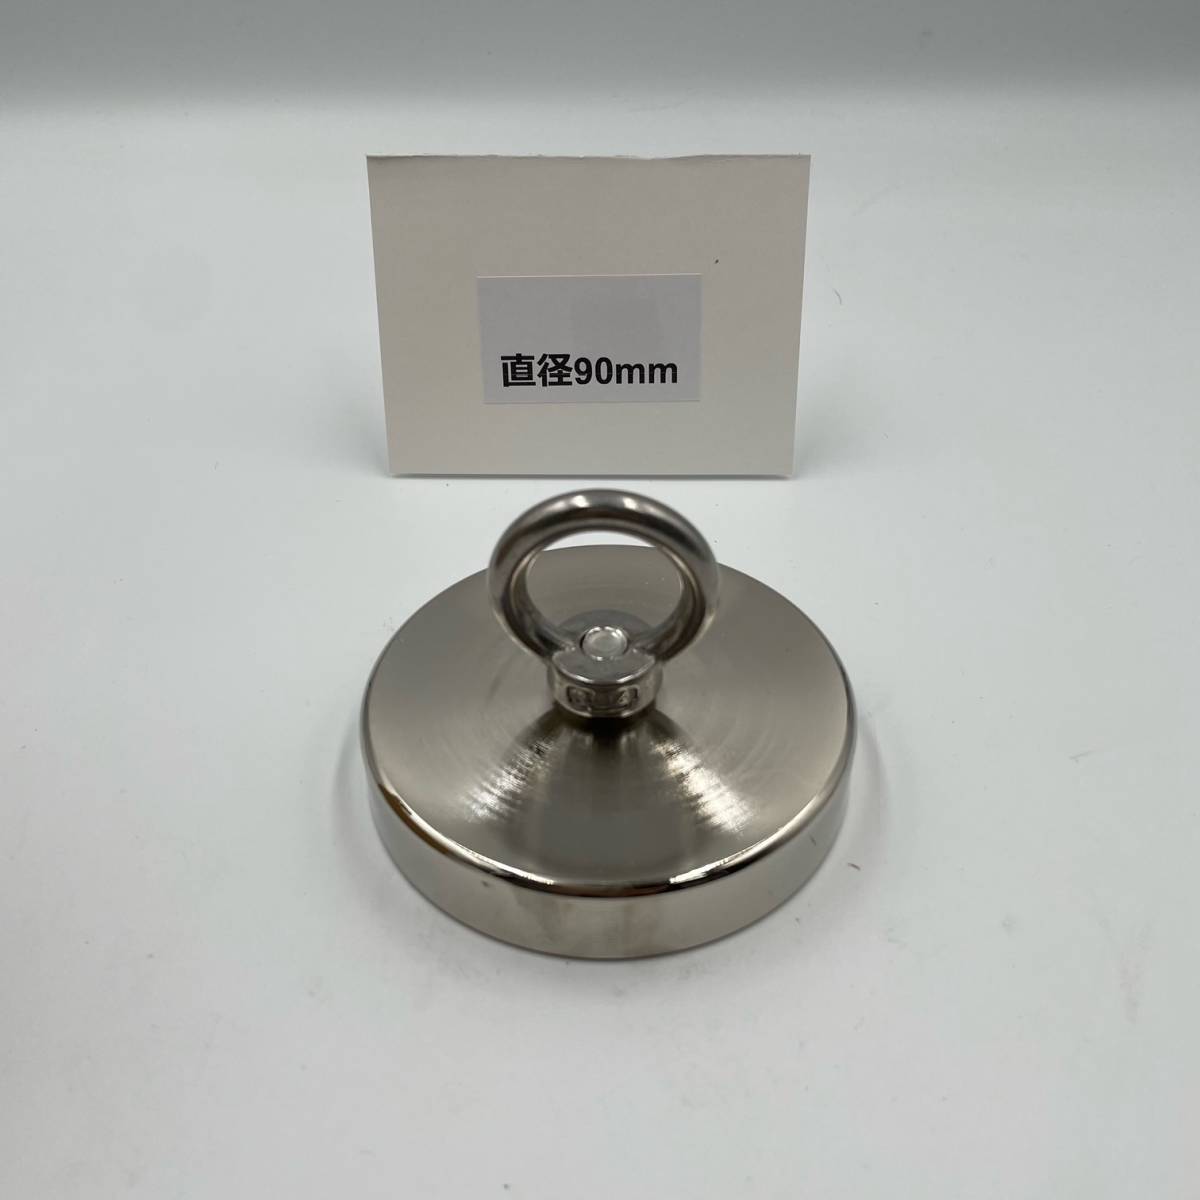 (A) super powerful magnet hook magnet 90mm withstand load 370kg Neo Jim magnet stainless steel magnet hook powerful . power . corrosion anti-rust 